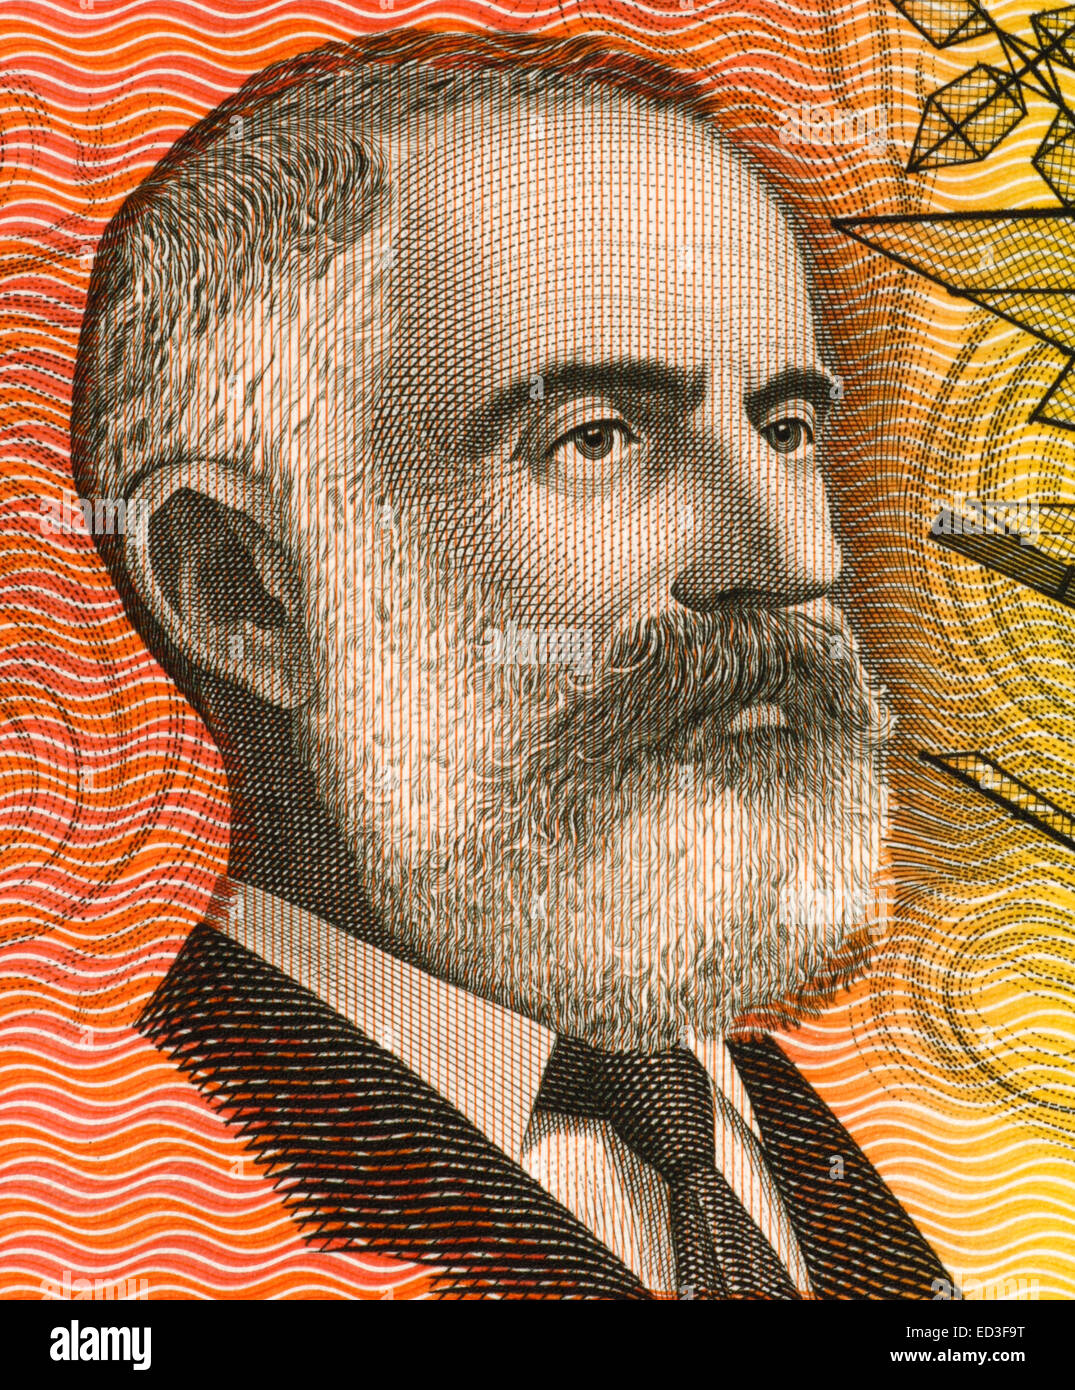 Lawrence Hargrave (1850-1915) on 20 Dollars 1974 banknote from Australia. Stock Photo